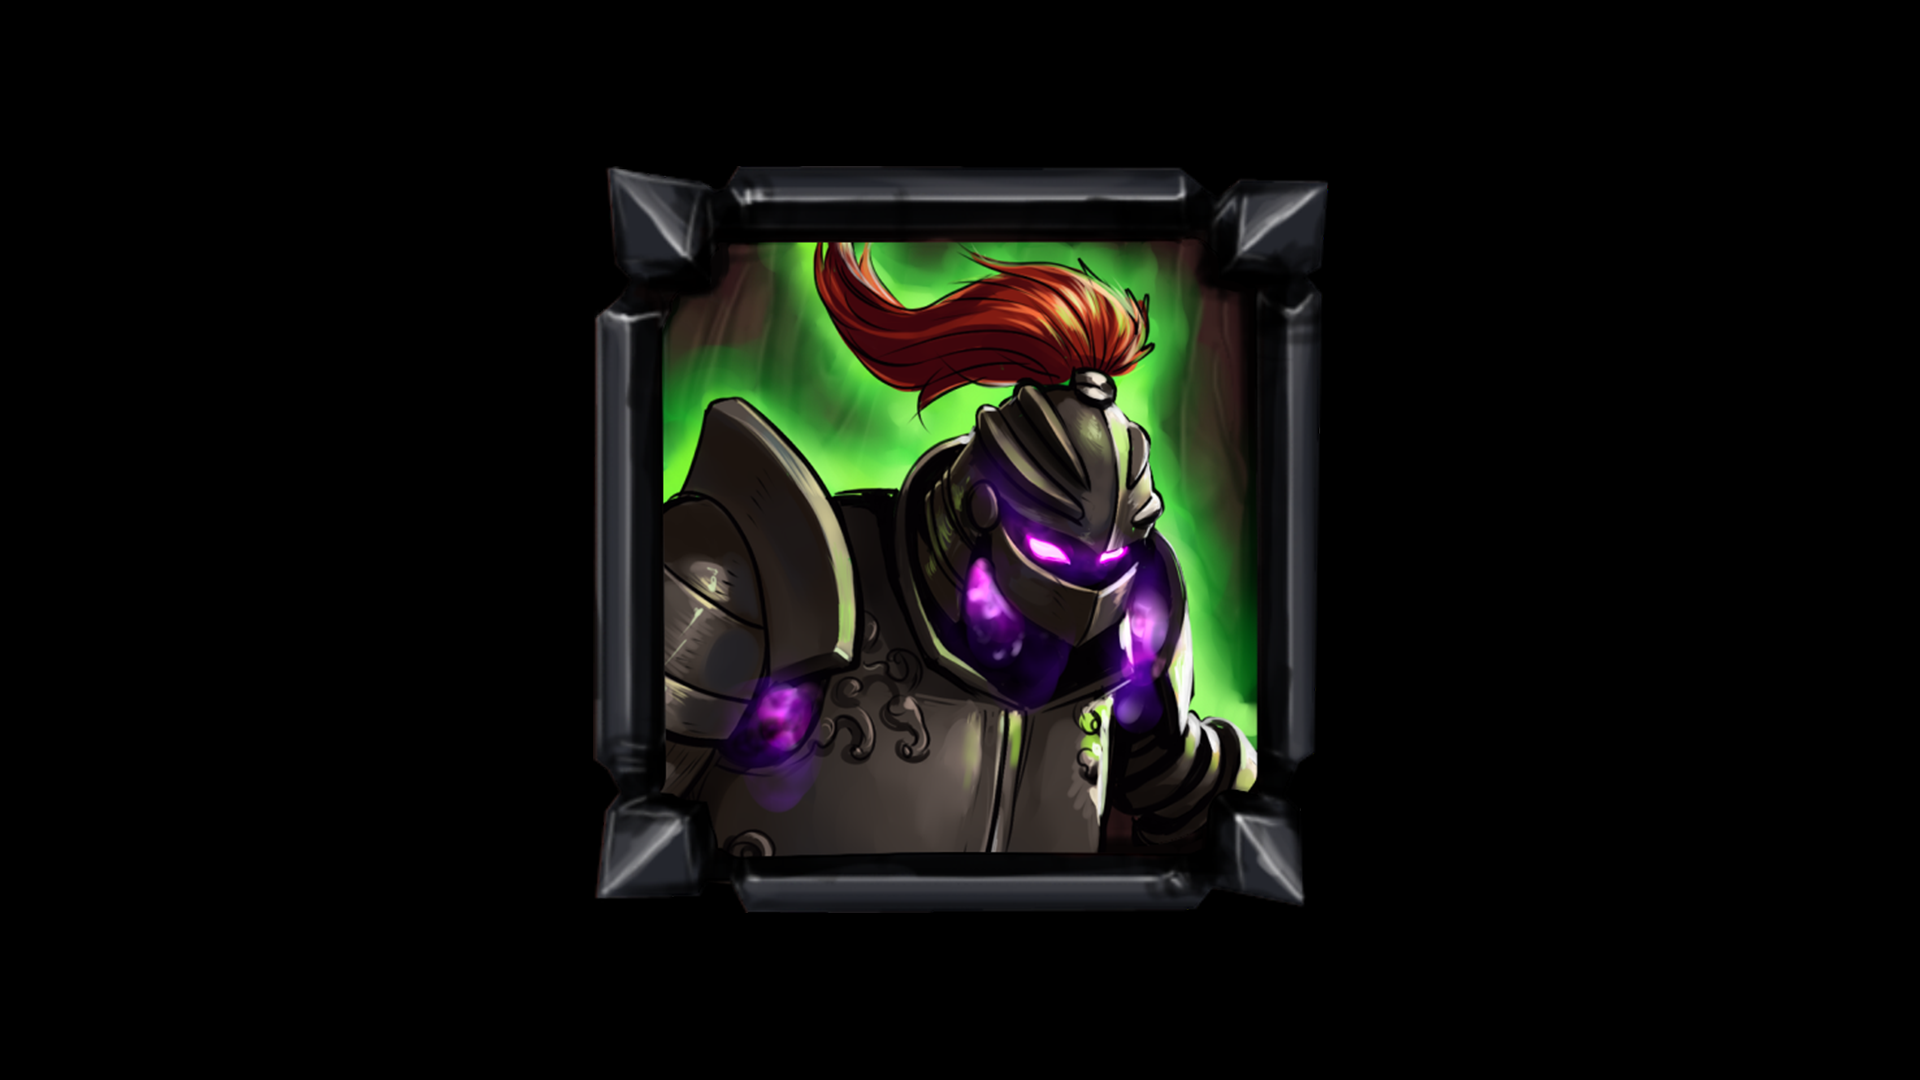 Icon for Ghost guardian